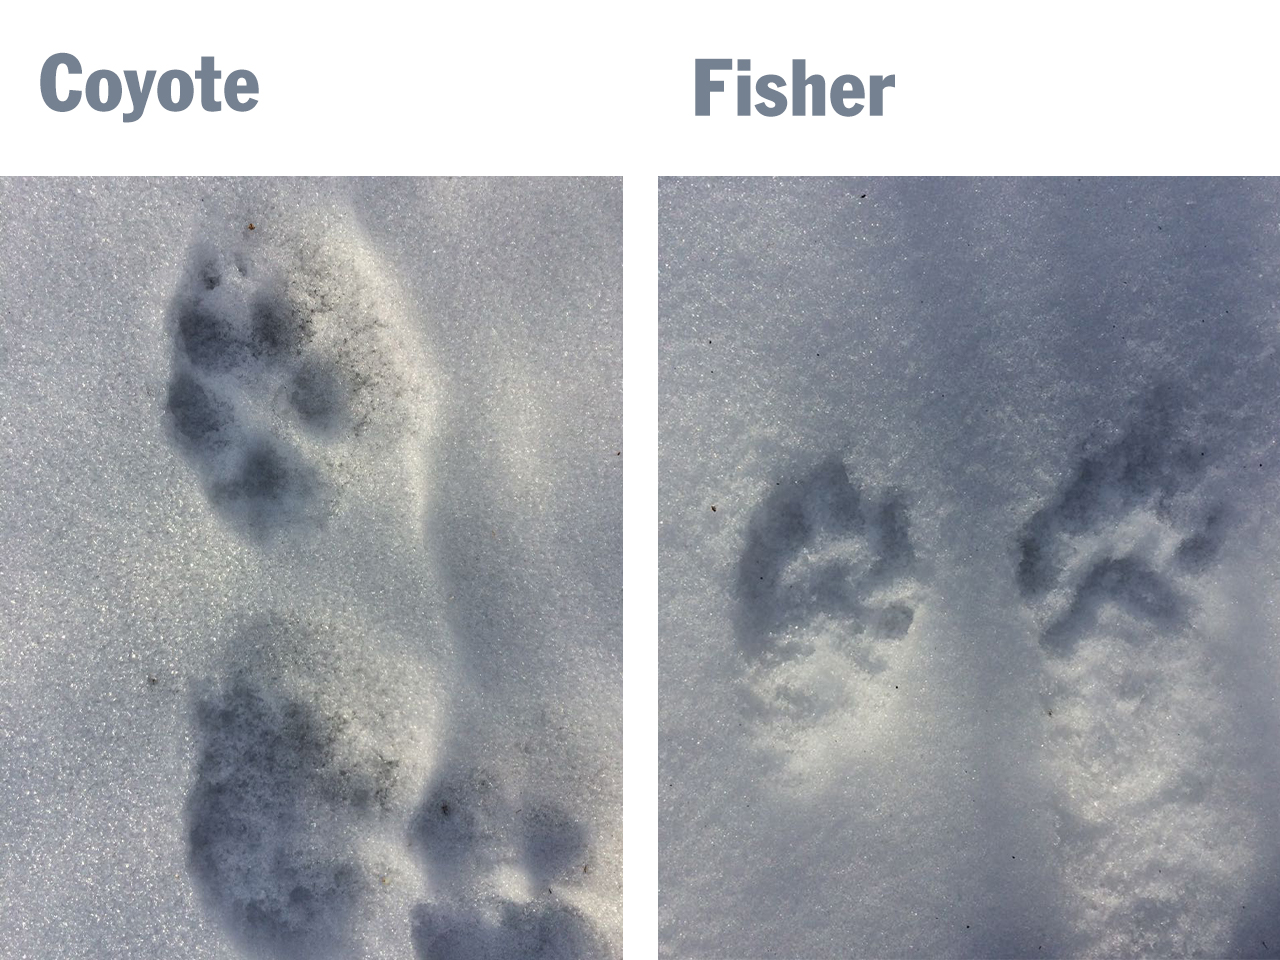 Coyote and fisher tracks